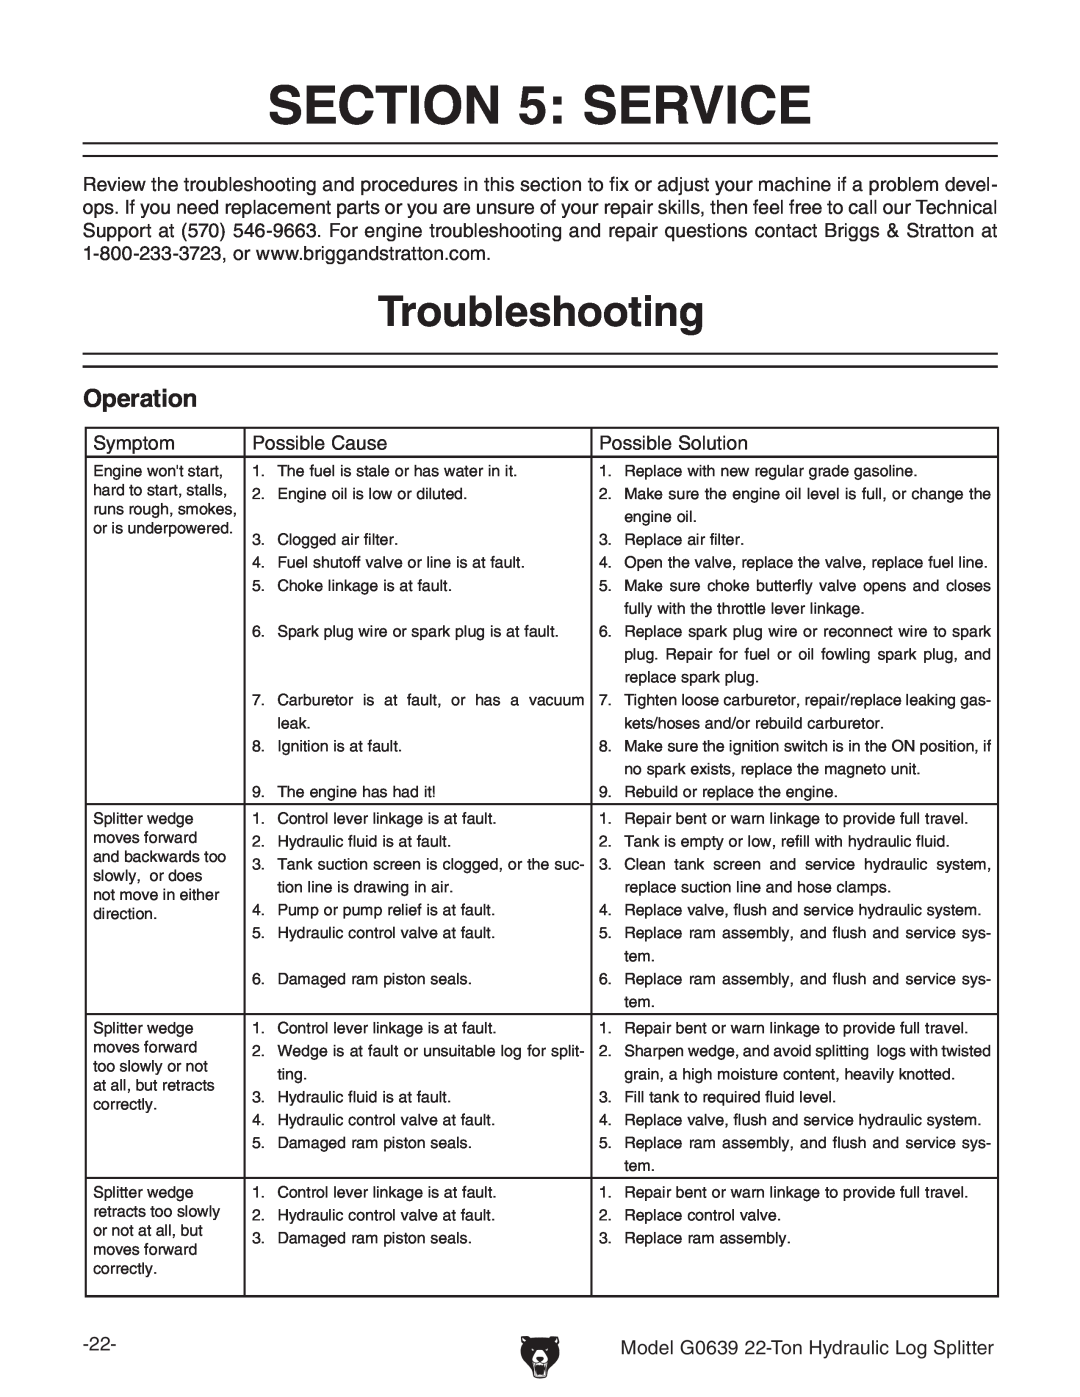 Grizzly G0639 owner manual Service, Troubleshooting, Operation Tshooting 